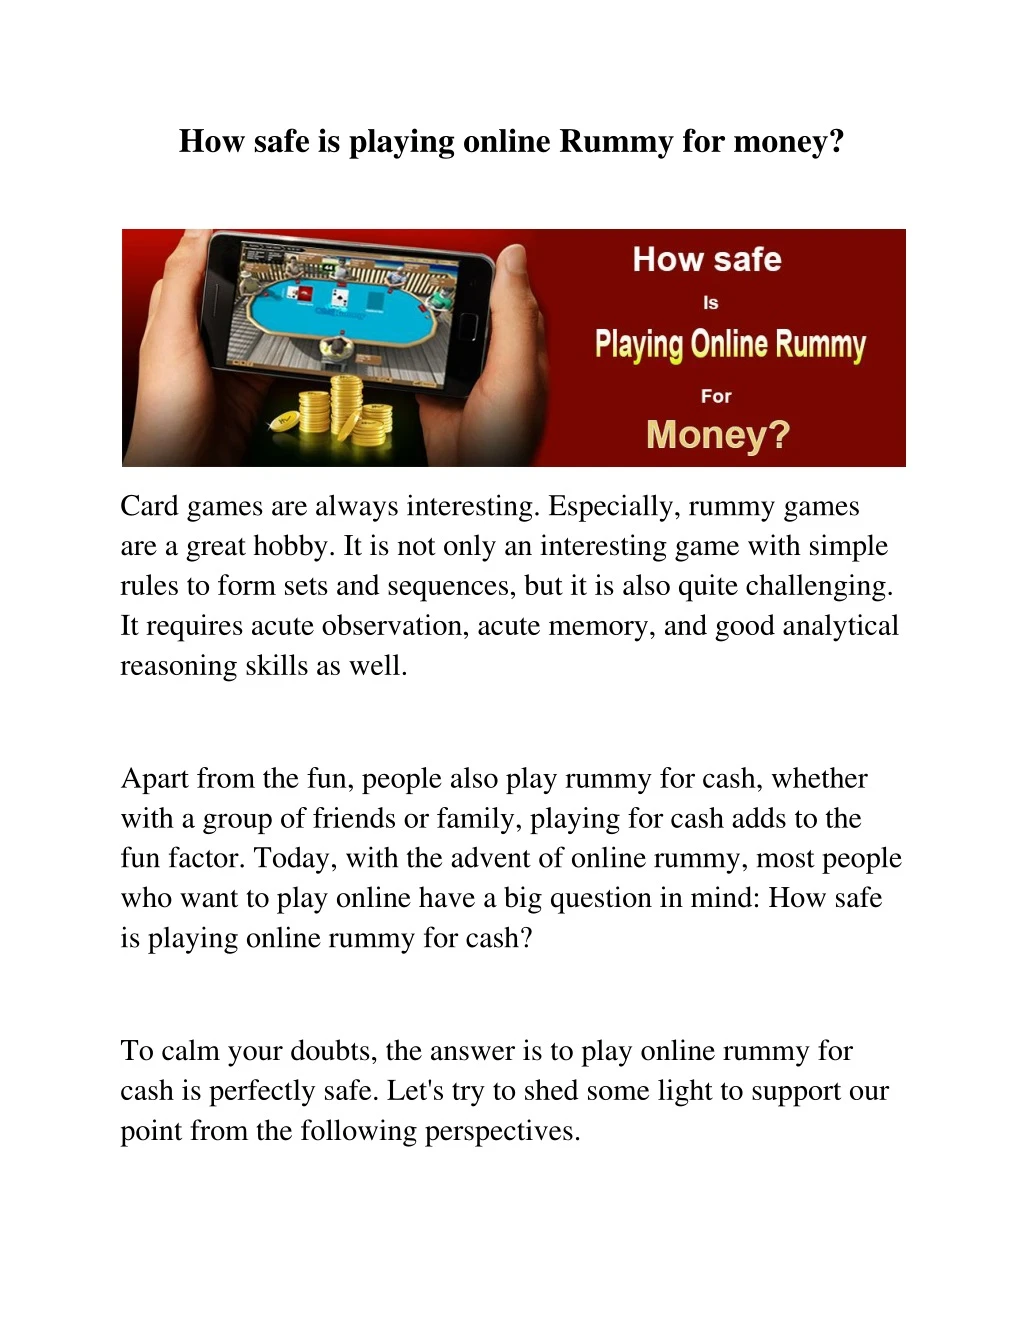 how safe is playing online rummy for money